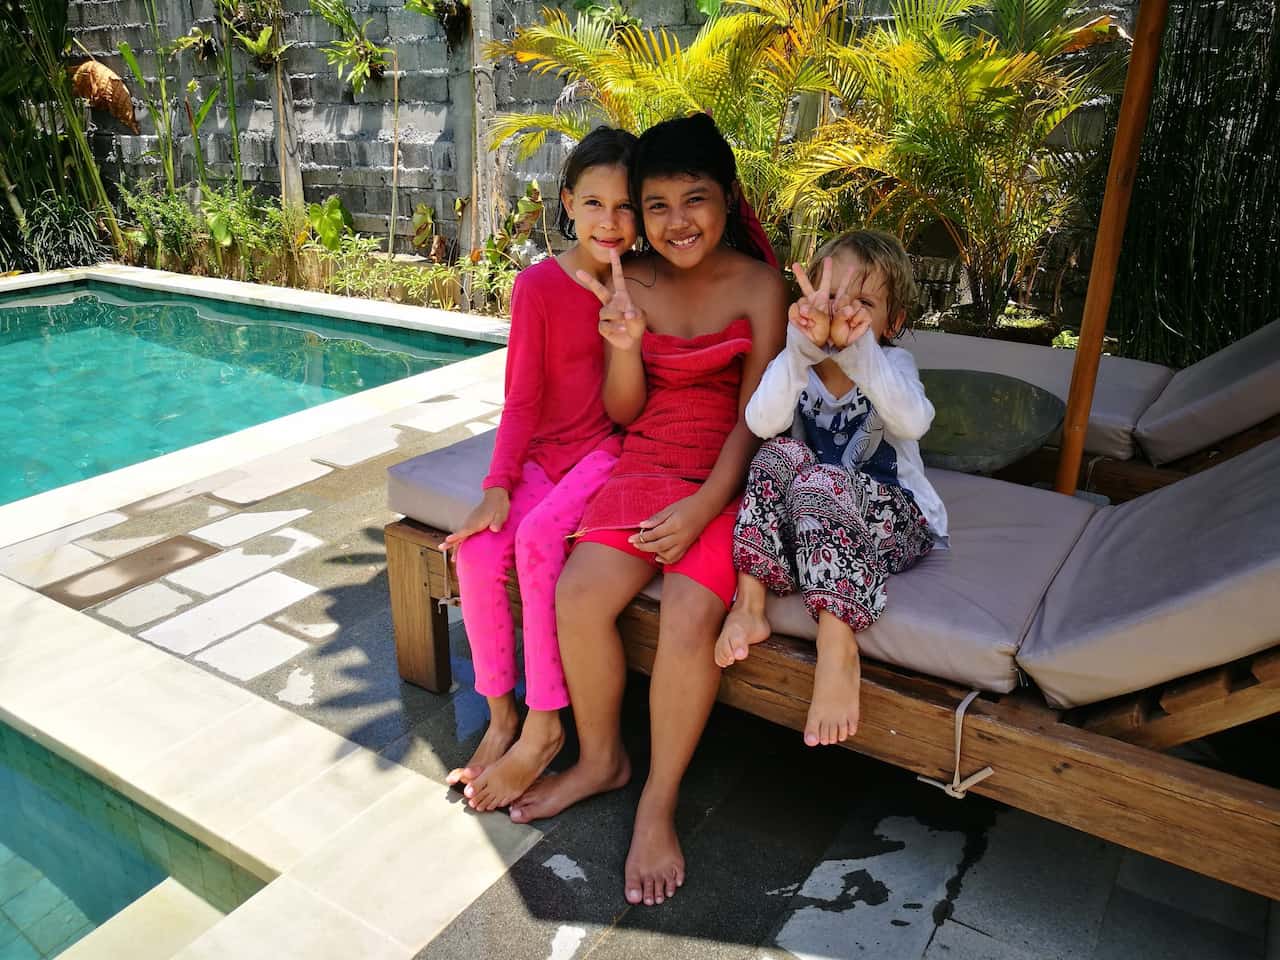 Children beside the pool, staying in the family compound during Nyepi, the Balinese New Year, to avoid evil spirits roaming around the island on this day